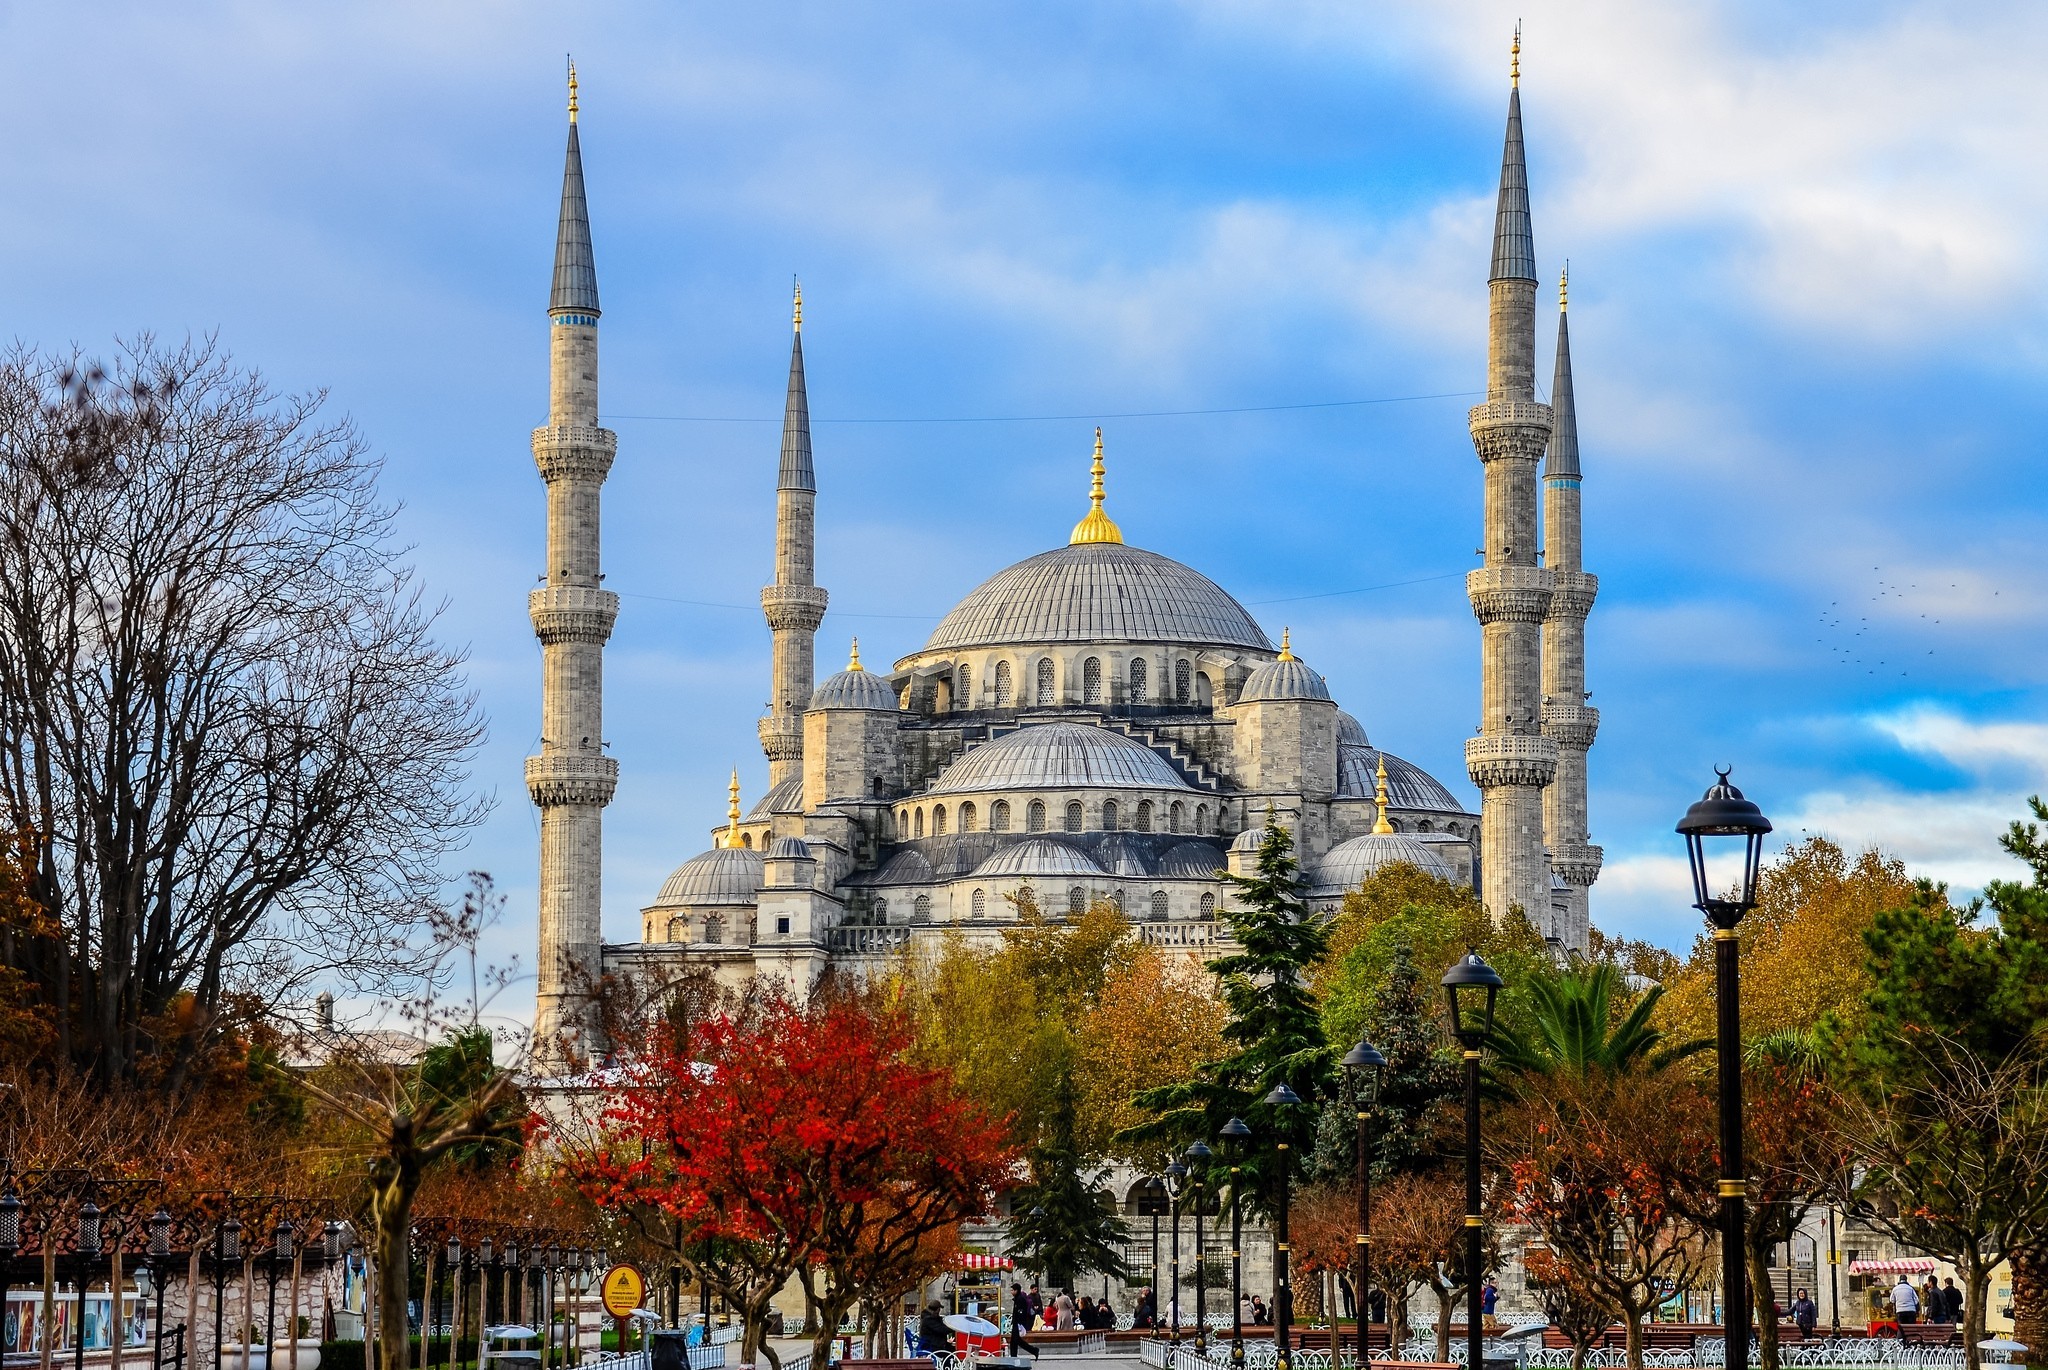 turkey, sultan ahmed mosque, mosques, mosque, istanbul, religious